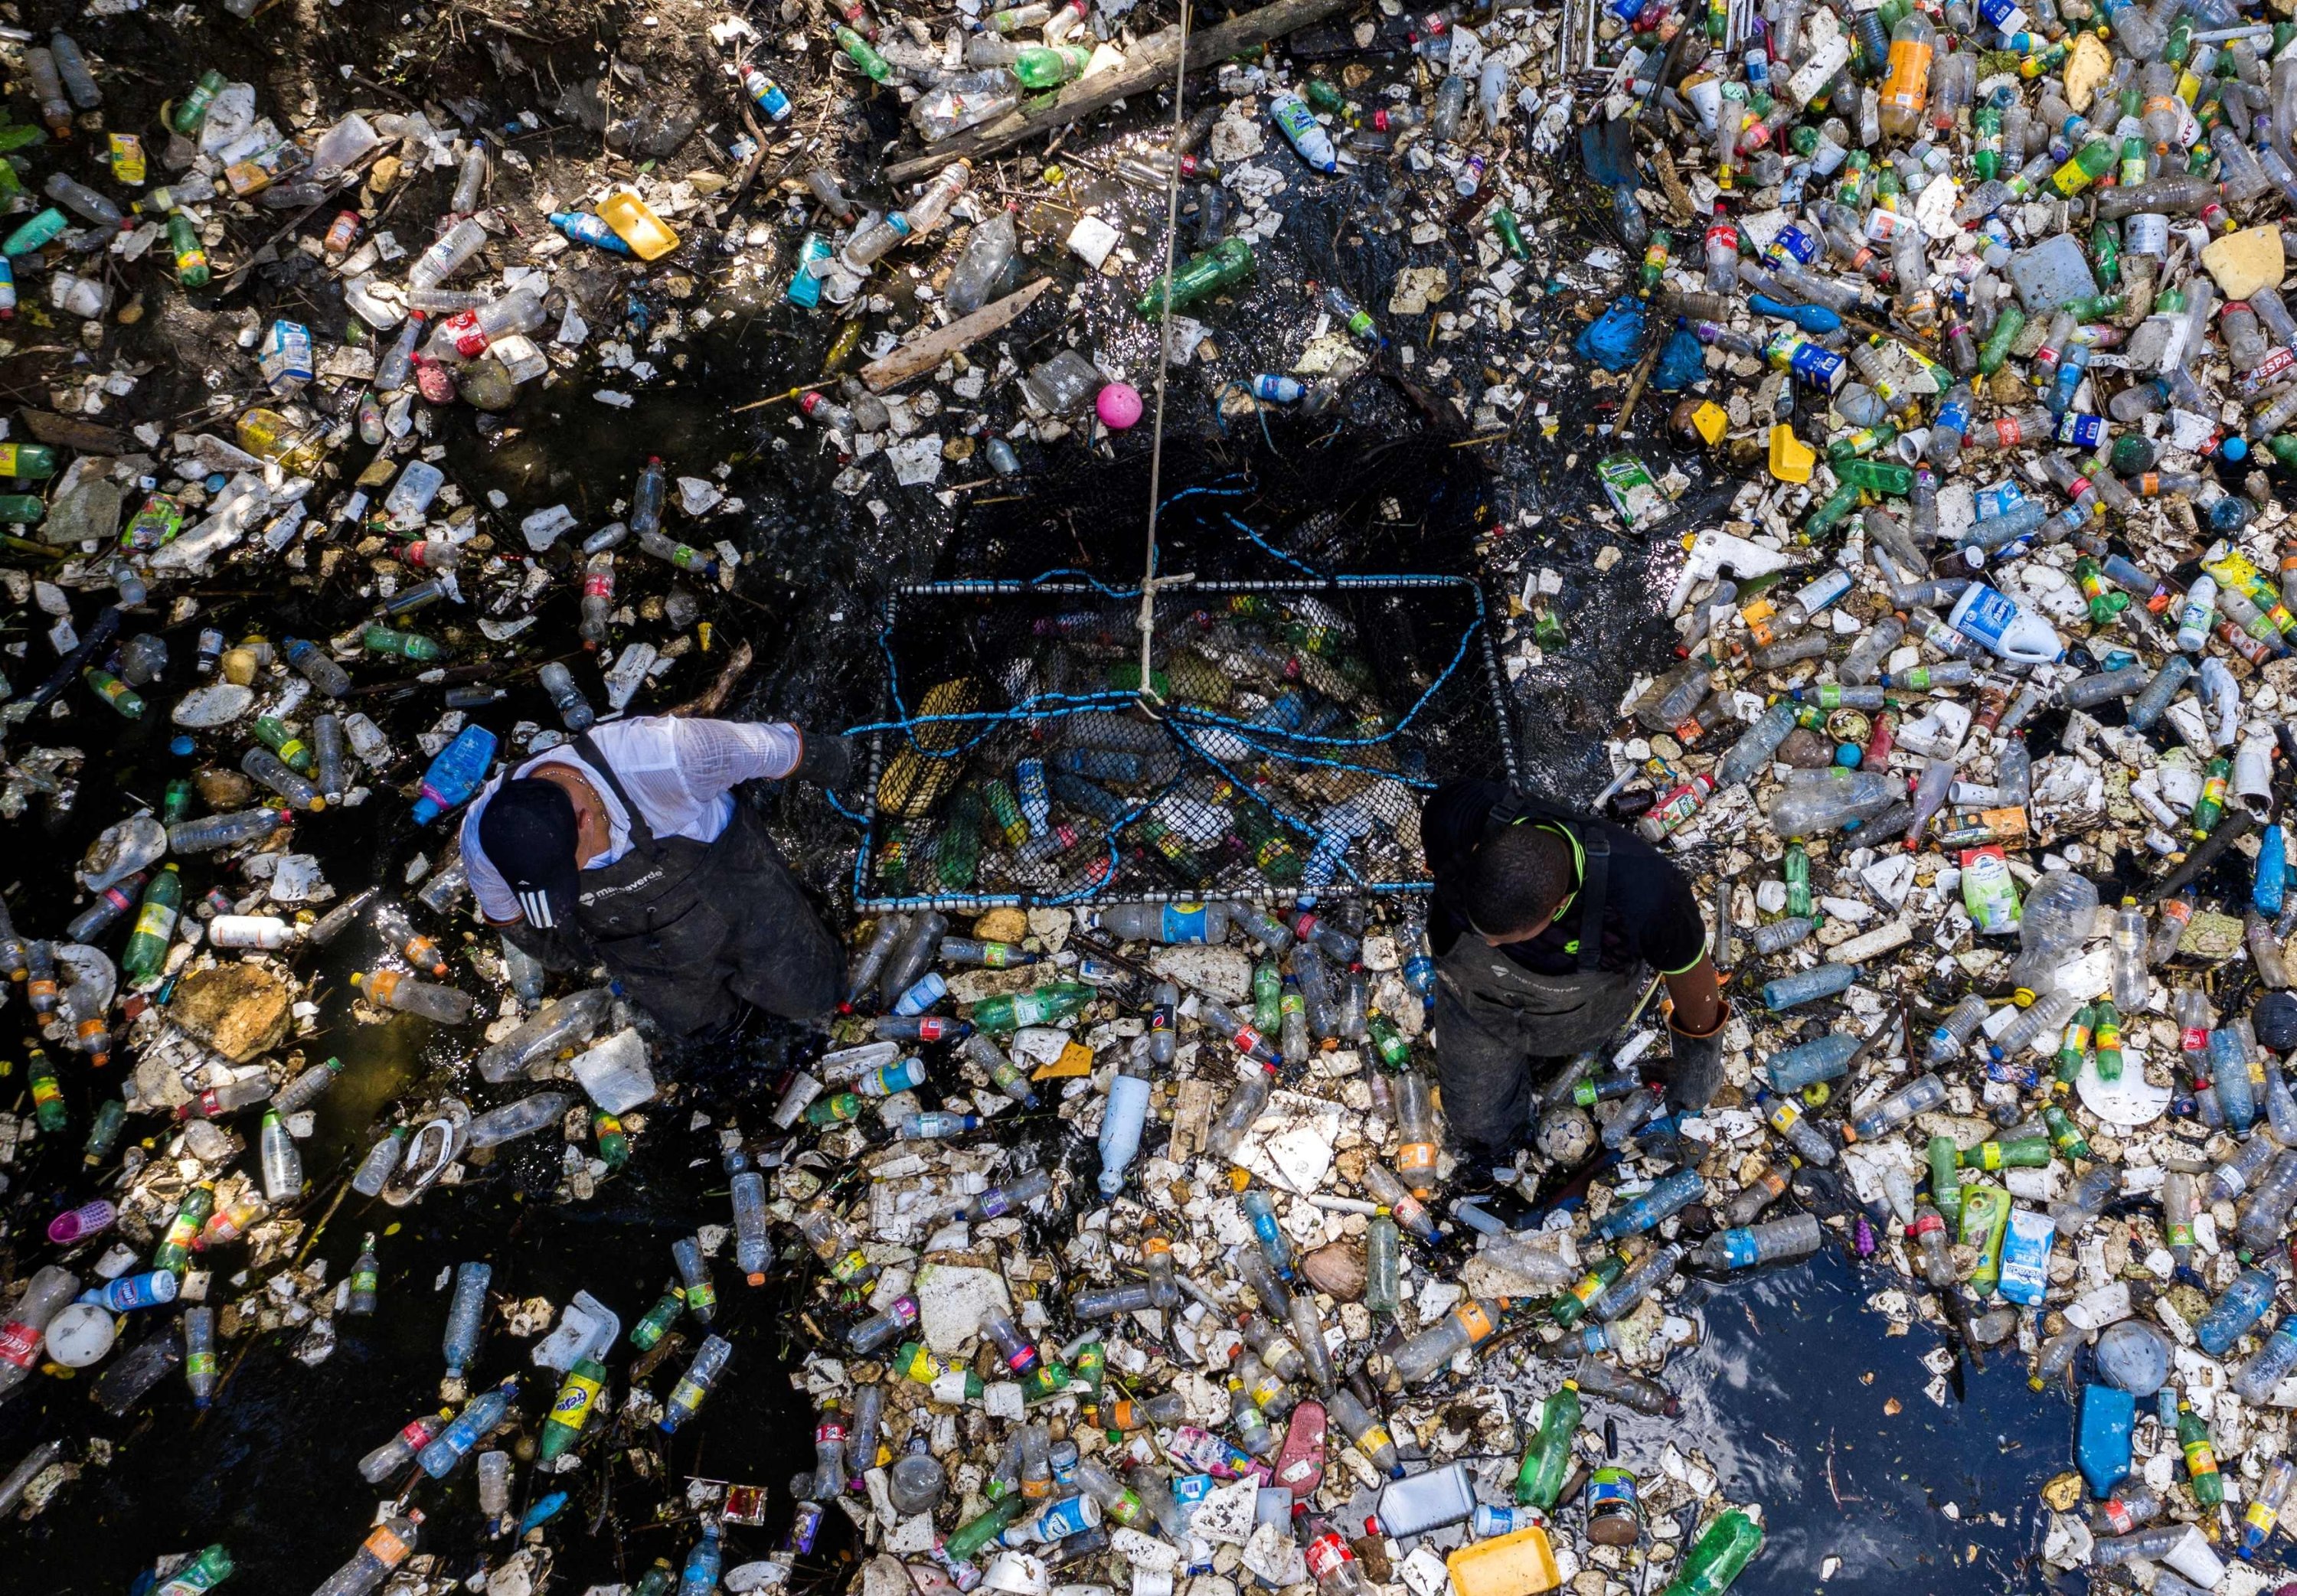 Workers collect garbage, including plastic waste, at the Matias Hernandez River in Costa del Este, Panama City, Sept. 23, 2019. (AFP Photo)